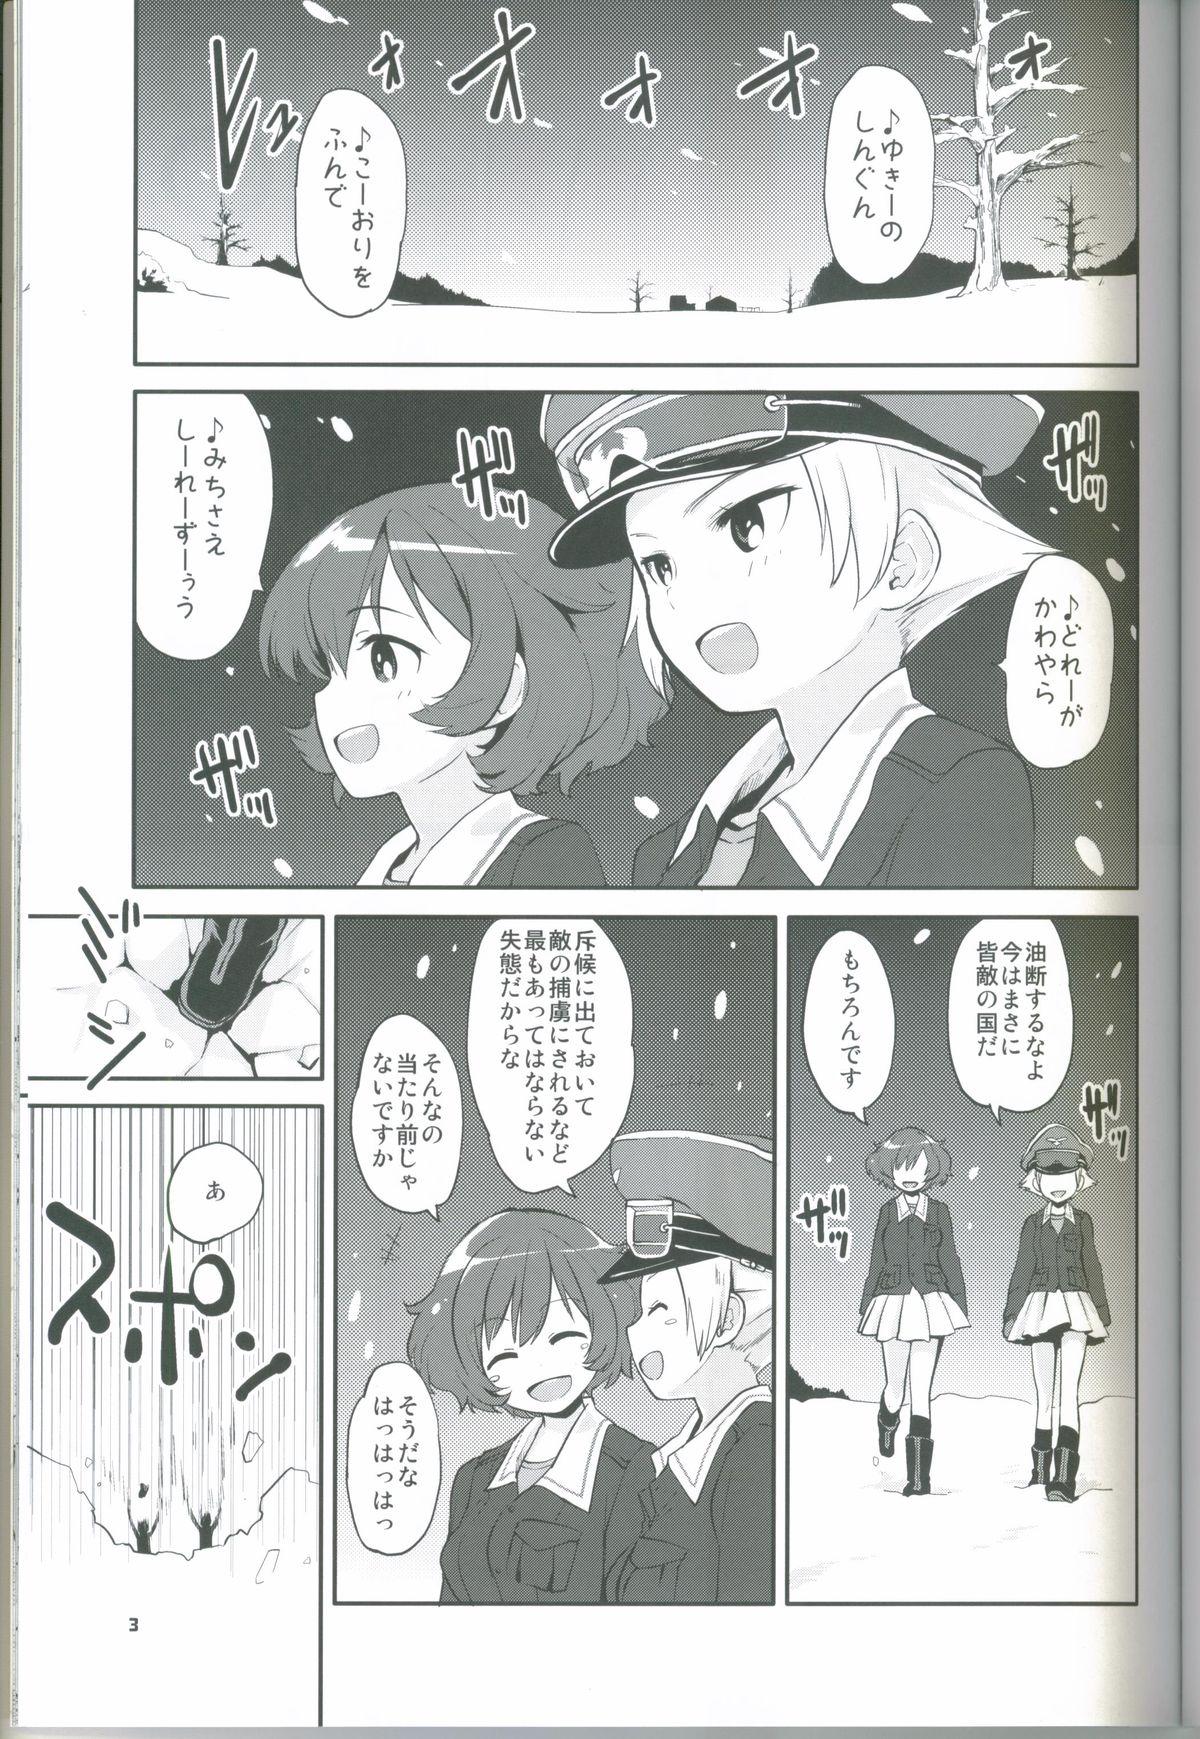 Animated The General Frost Has Come! - Girls und panzer Butthole - Page 2